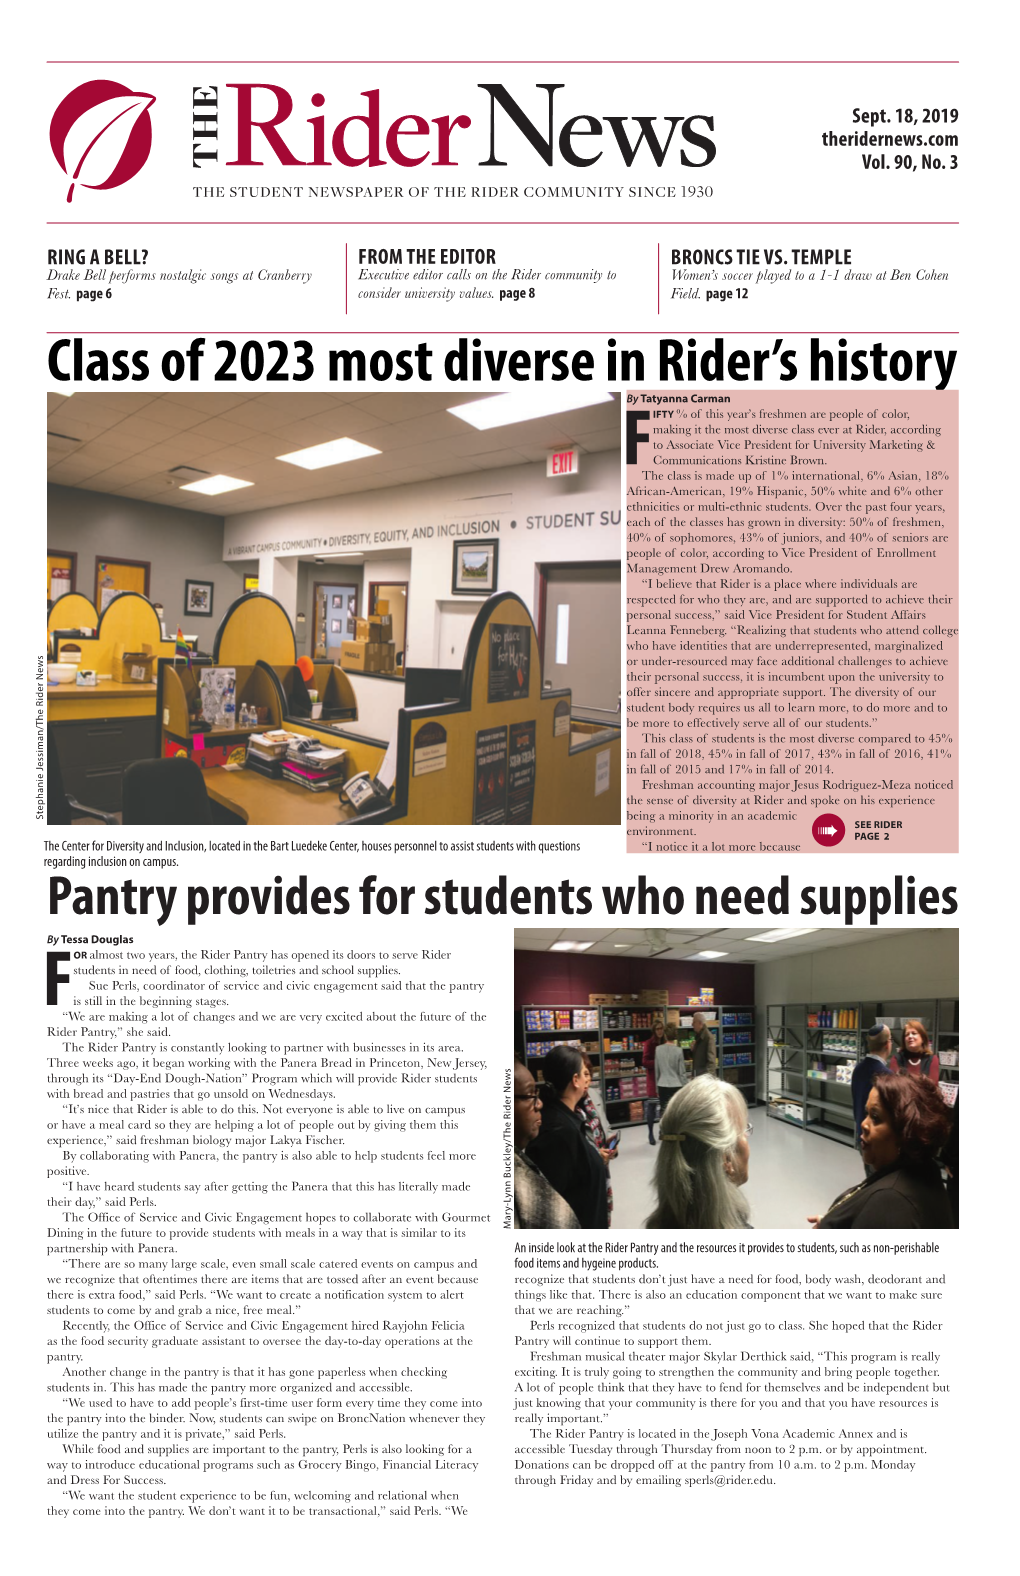 Class of 2023 Most Diverse in Rider's History